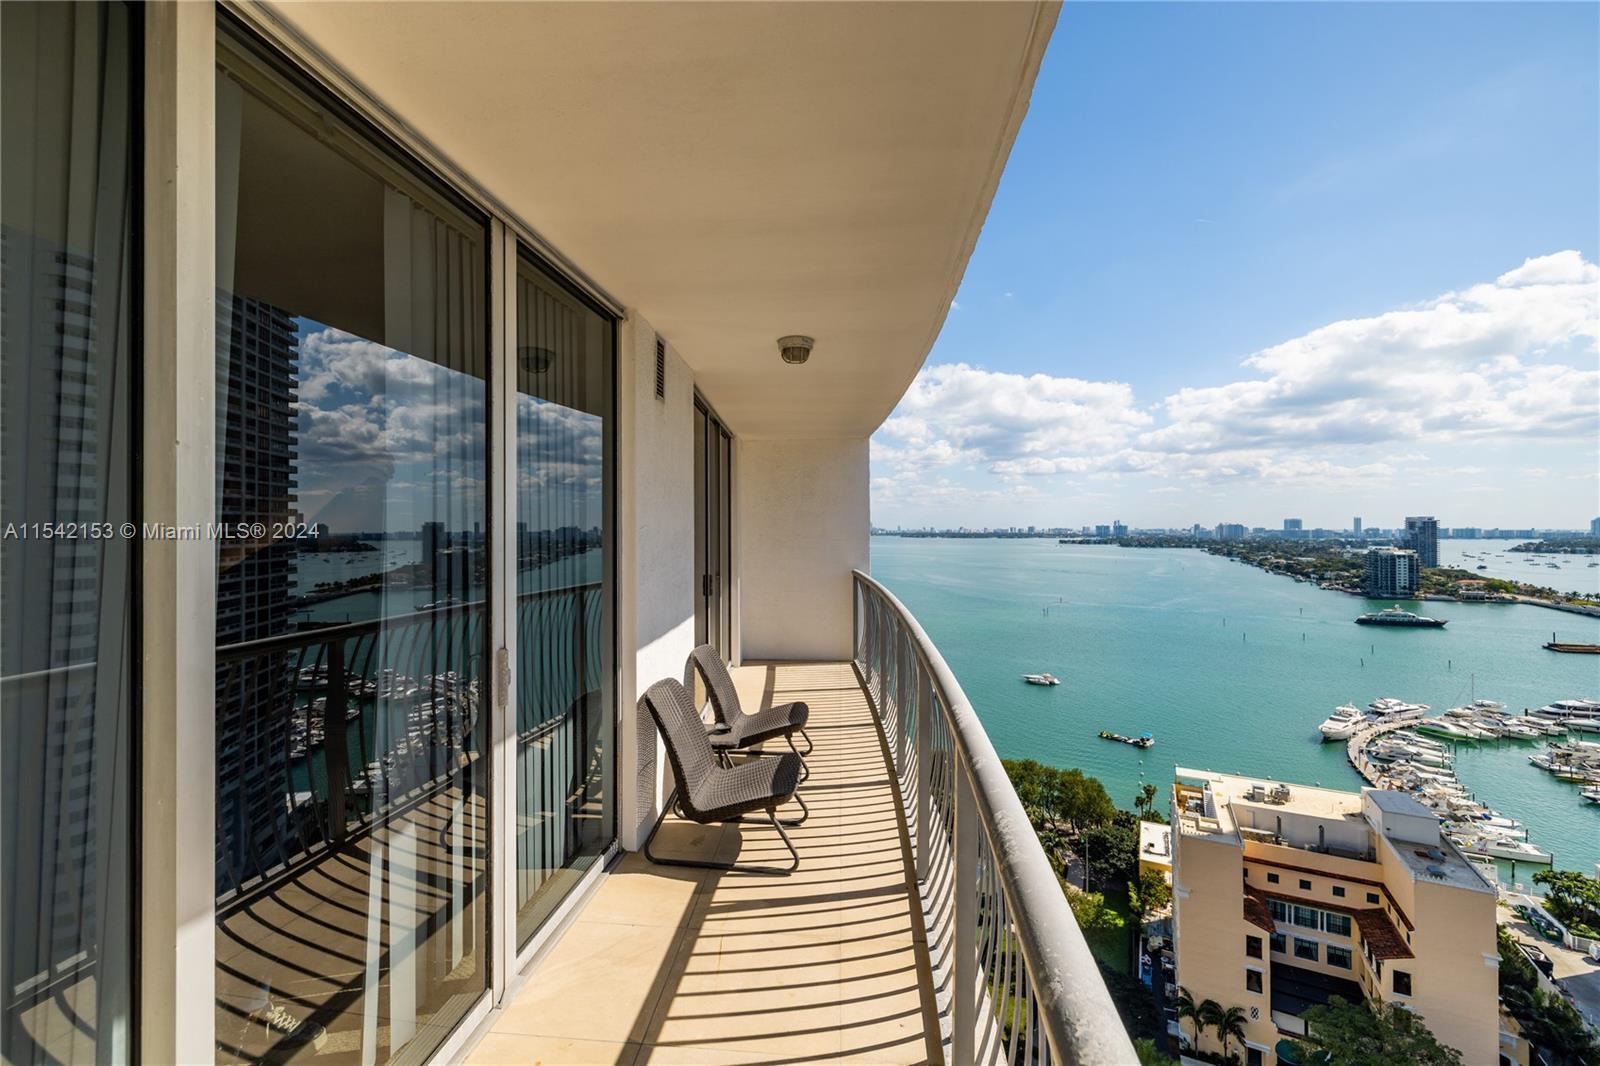 Welcome to this stunning 1-bedroom, 1-bathroom condo in the heart of Edgewater, offering breathtakin